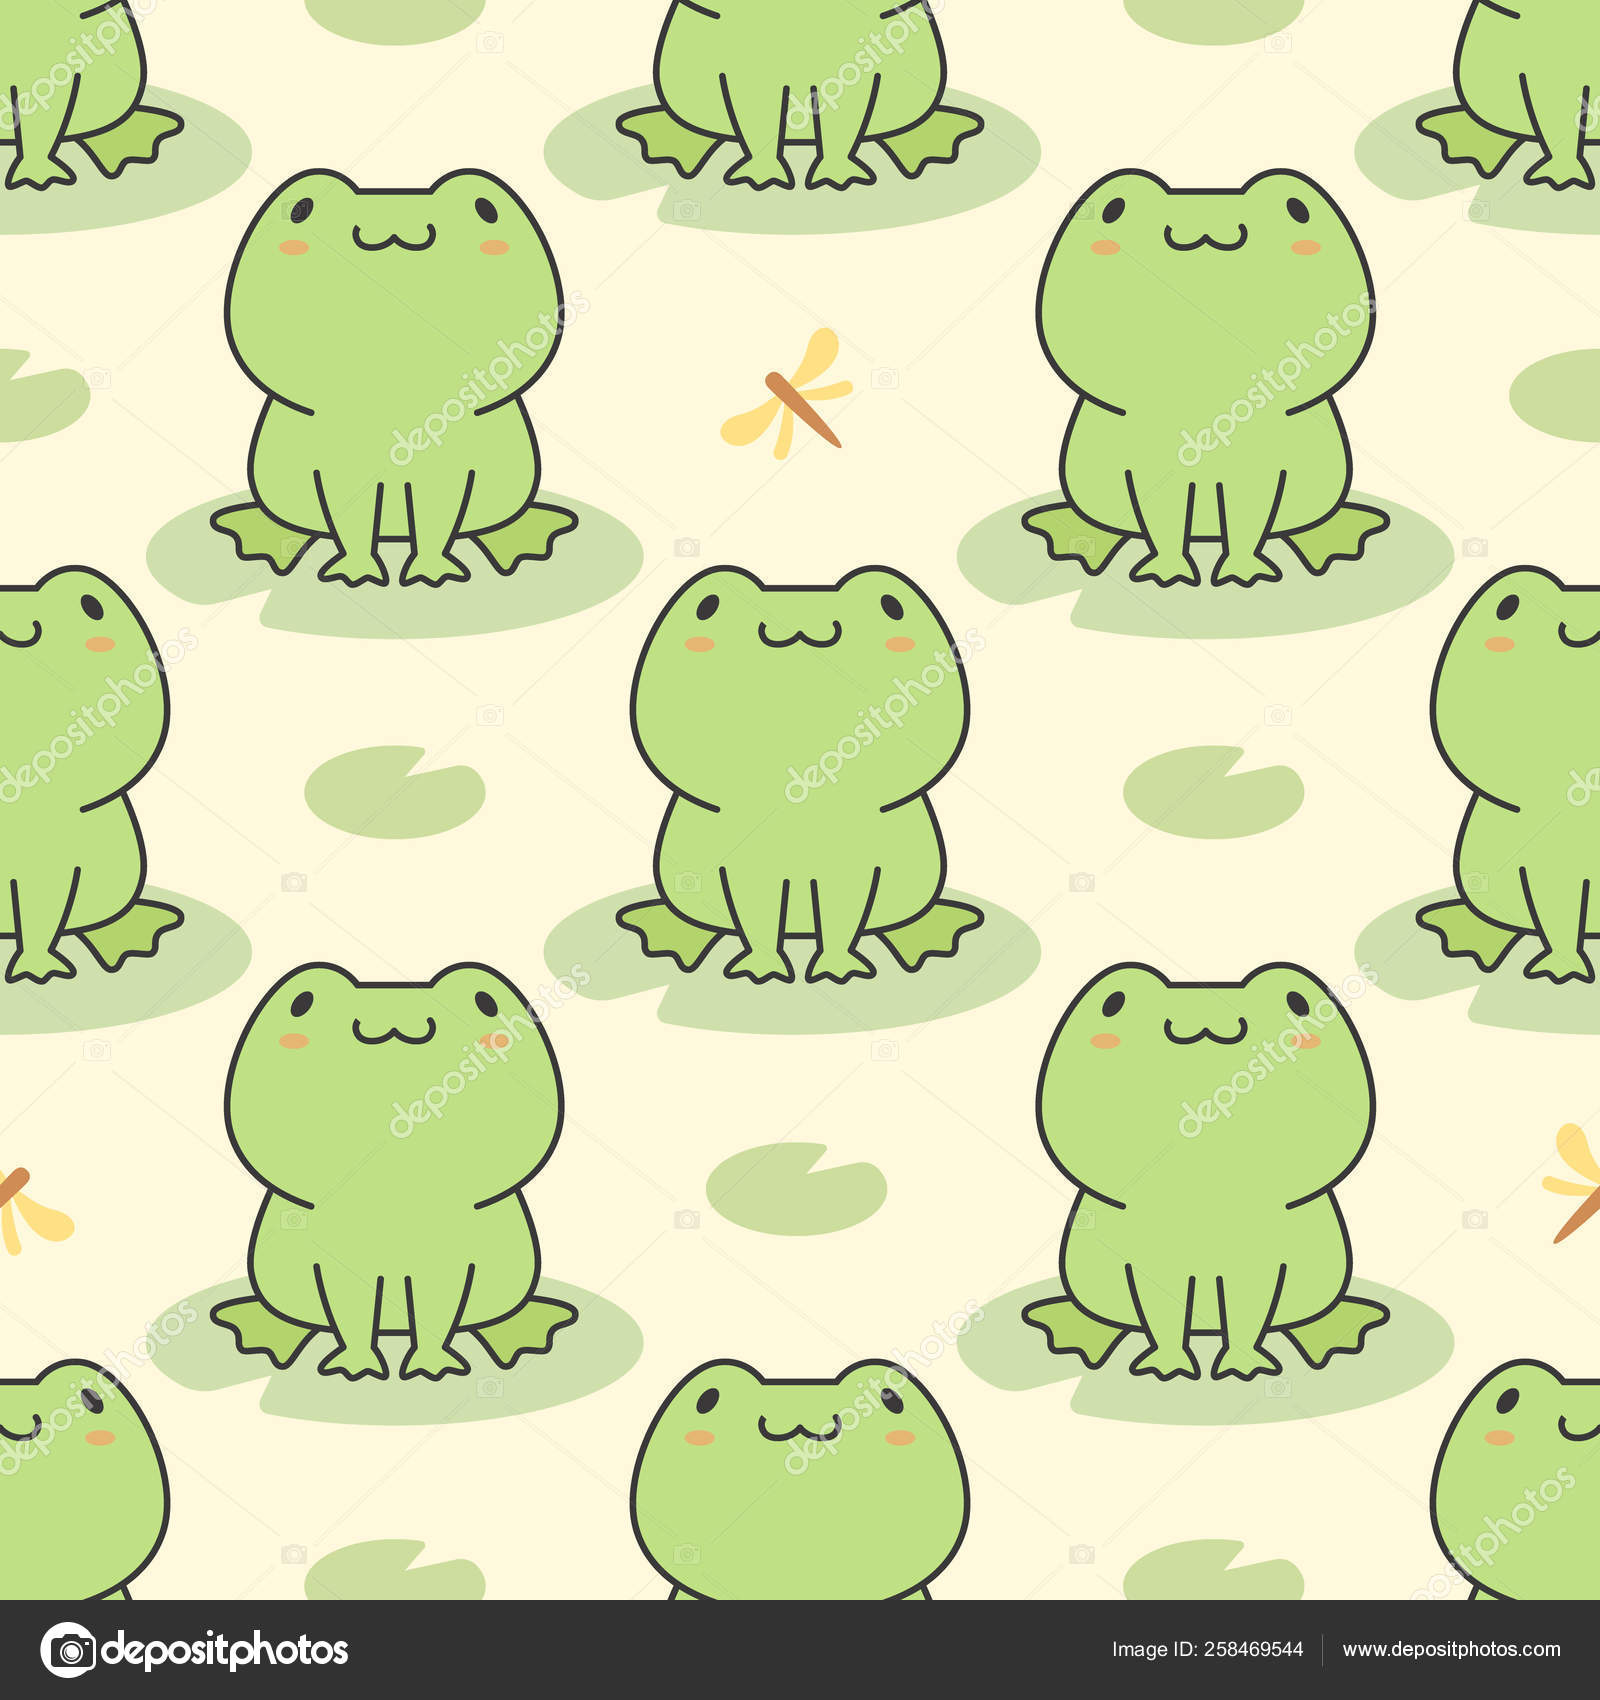 Cute Animated Frog Wallpapers